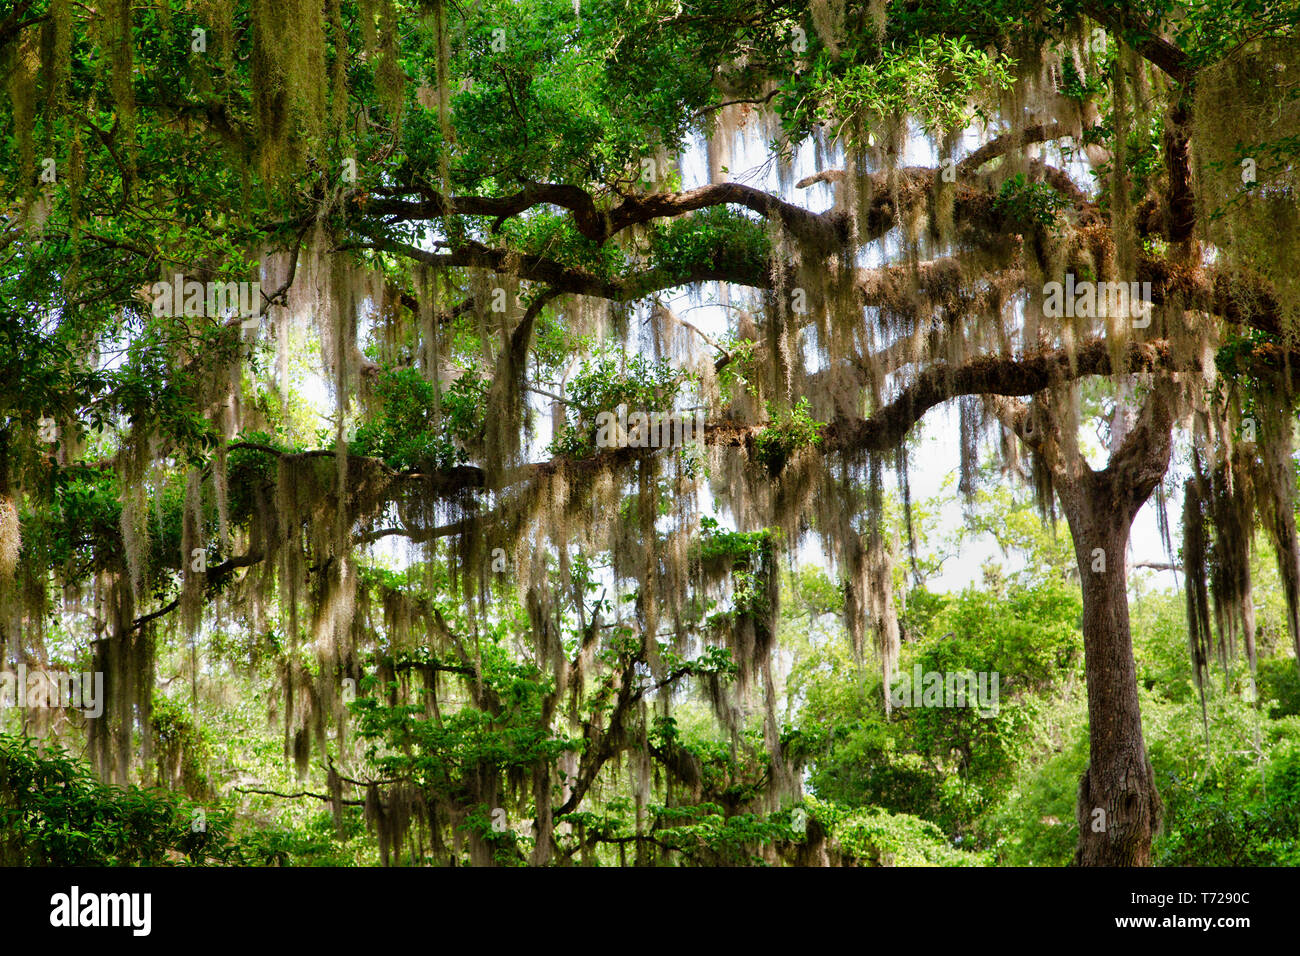 Spanish Moss in the Trees Stock Photo - Alamy